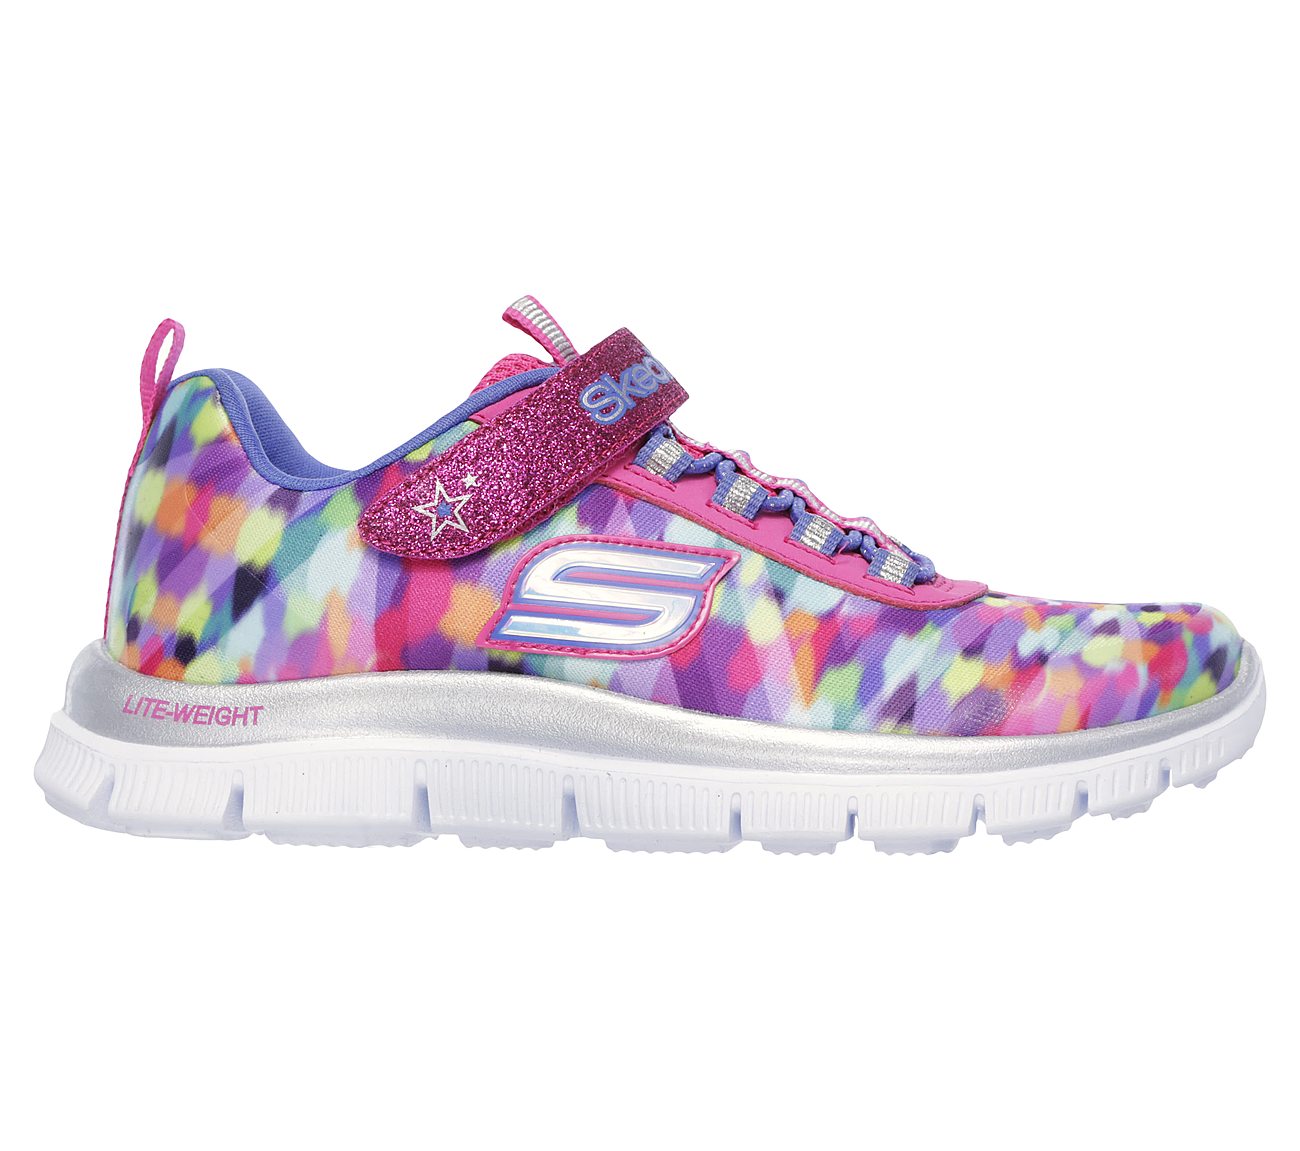 skechers multi colored running shoes